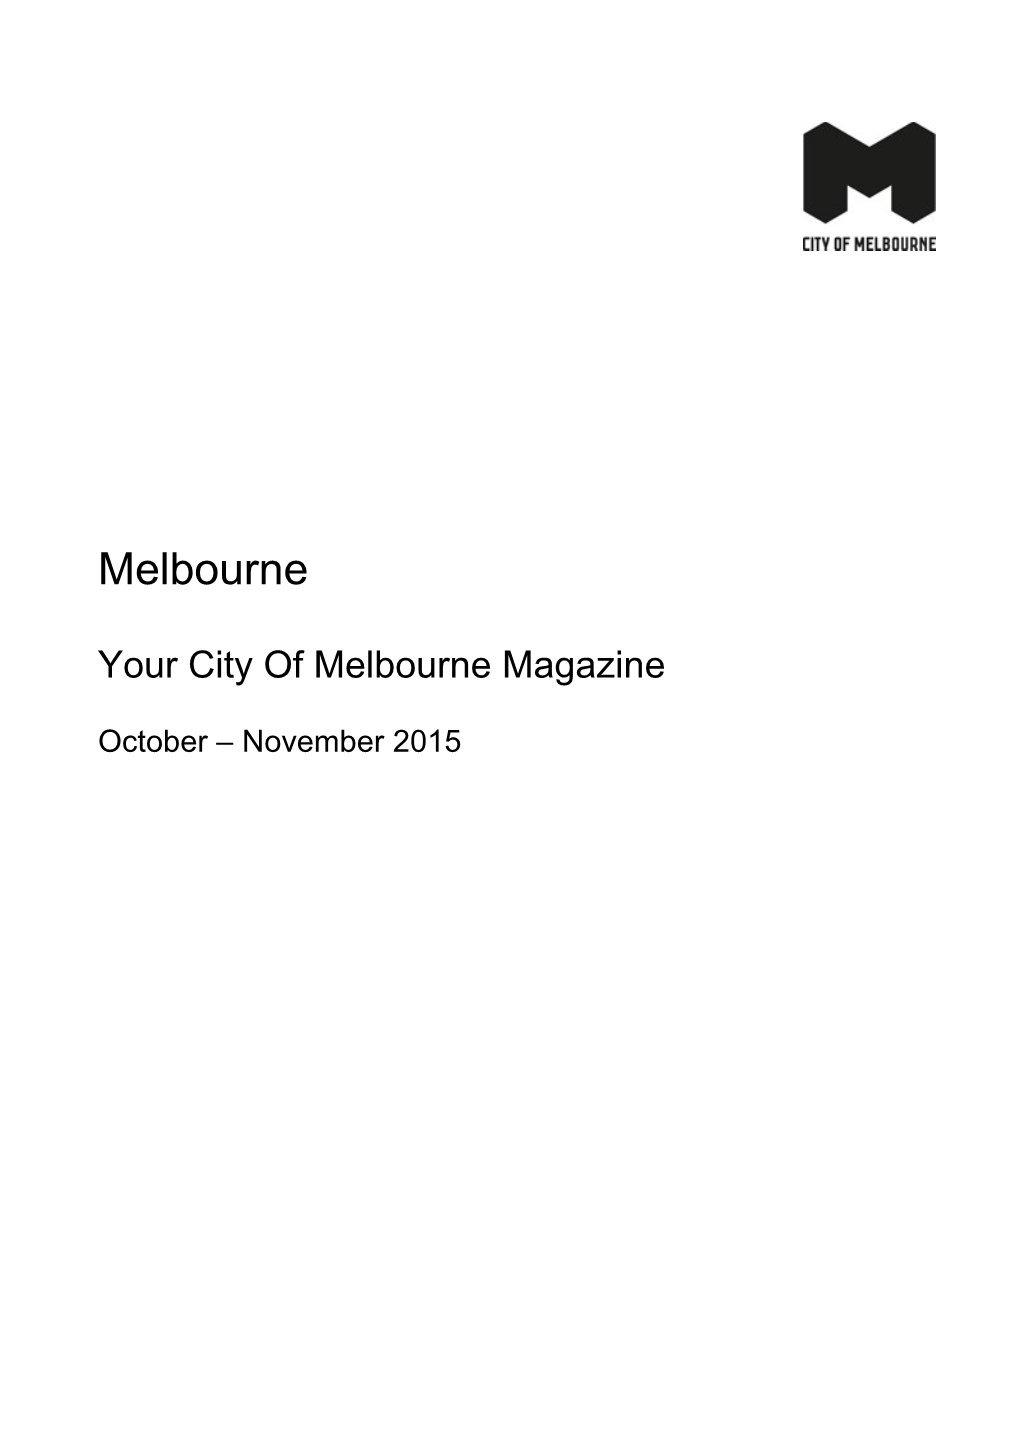 Your City of Melbourne Magazine s1